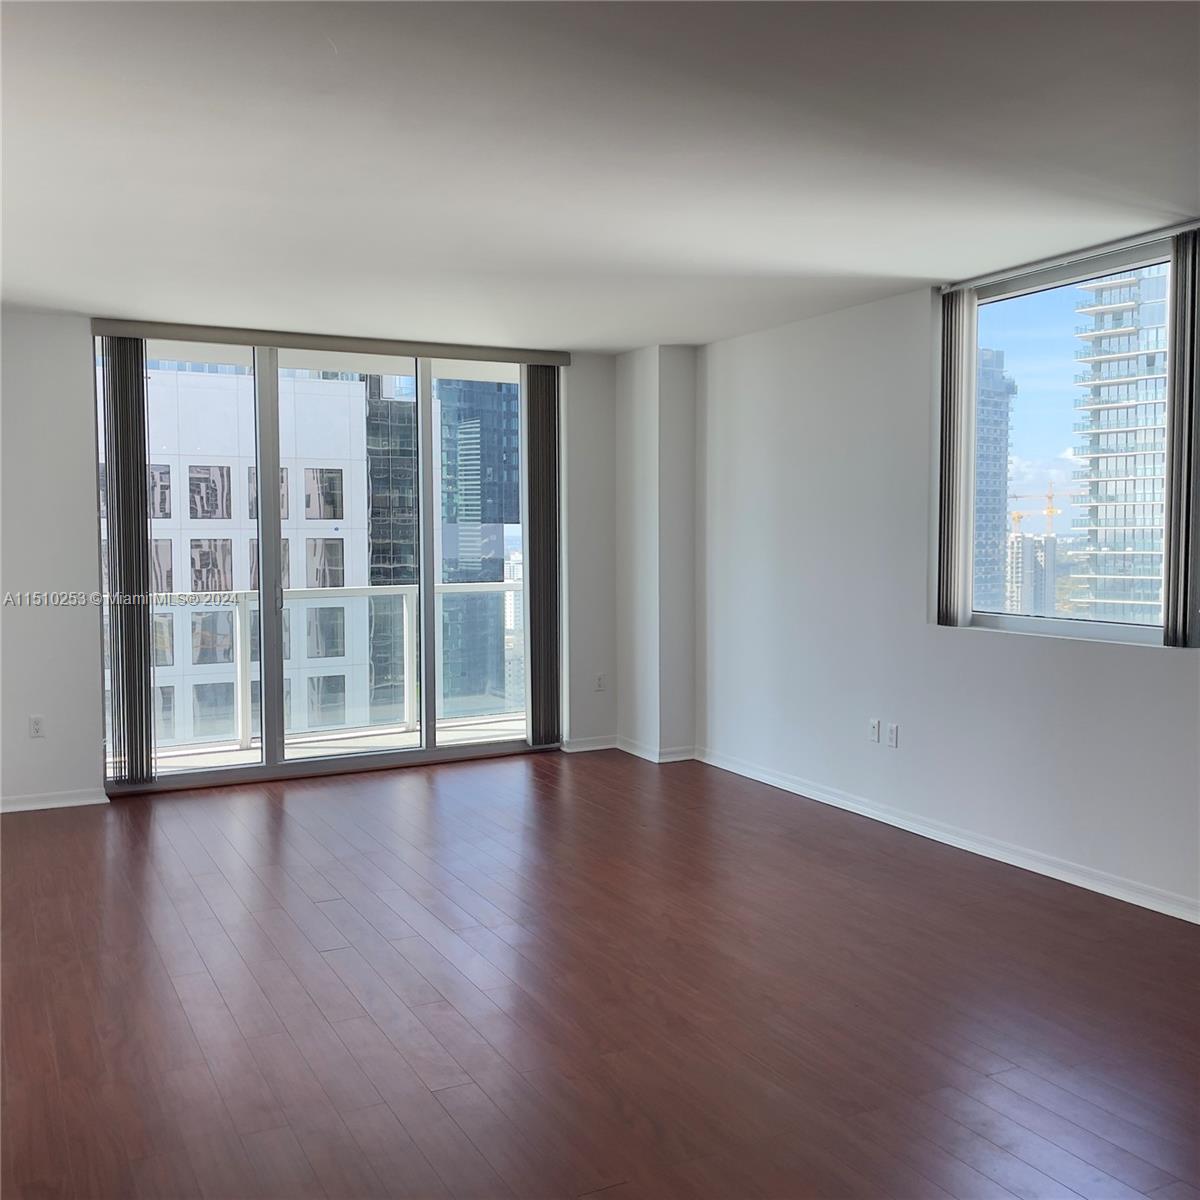 In the center of Brickell Financial District, enjoy luxury lifestyle on this beautiful and spacious split unit, 2 Bed 2
baths, with wood laminated floors. Stainless steel appliances, and quartz counter-top. Great amenities including a
rooftop pool and more, common area pool, gym and spa, and party rooms. Best location on Brickell Ave, at walking
distance to Brickell City Centre, Miami Downtown, easy access to express way, minutes from Miami Beach, Miami
International Airport and all excitement of restaurants, cafe's, bars and nightlife, Metro Mover, Metro Rail, theaters.
See brokers remarks.